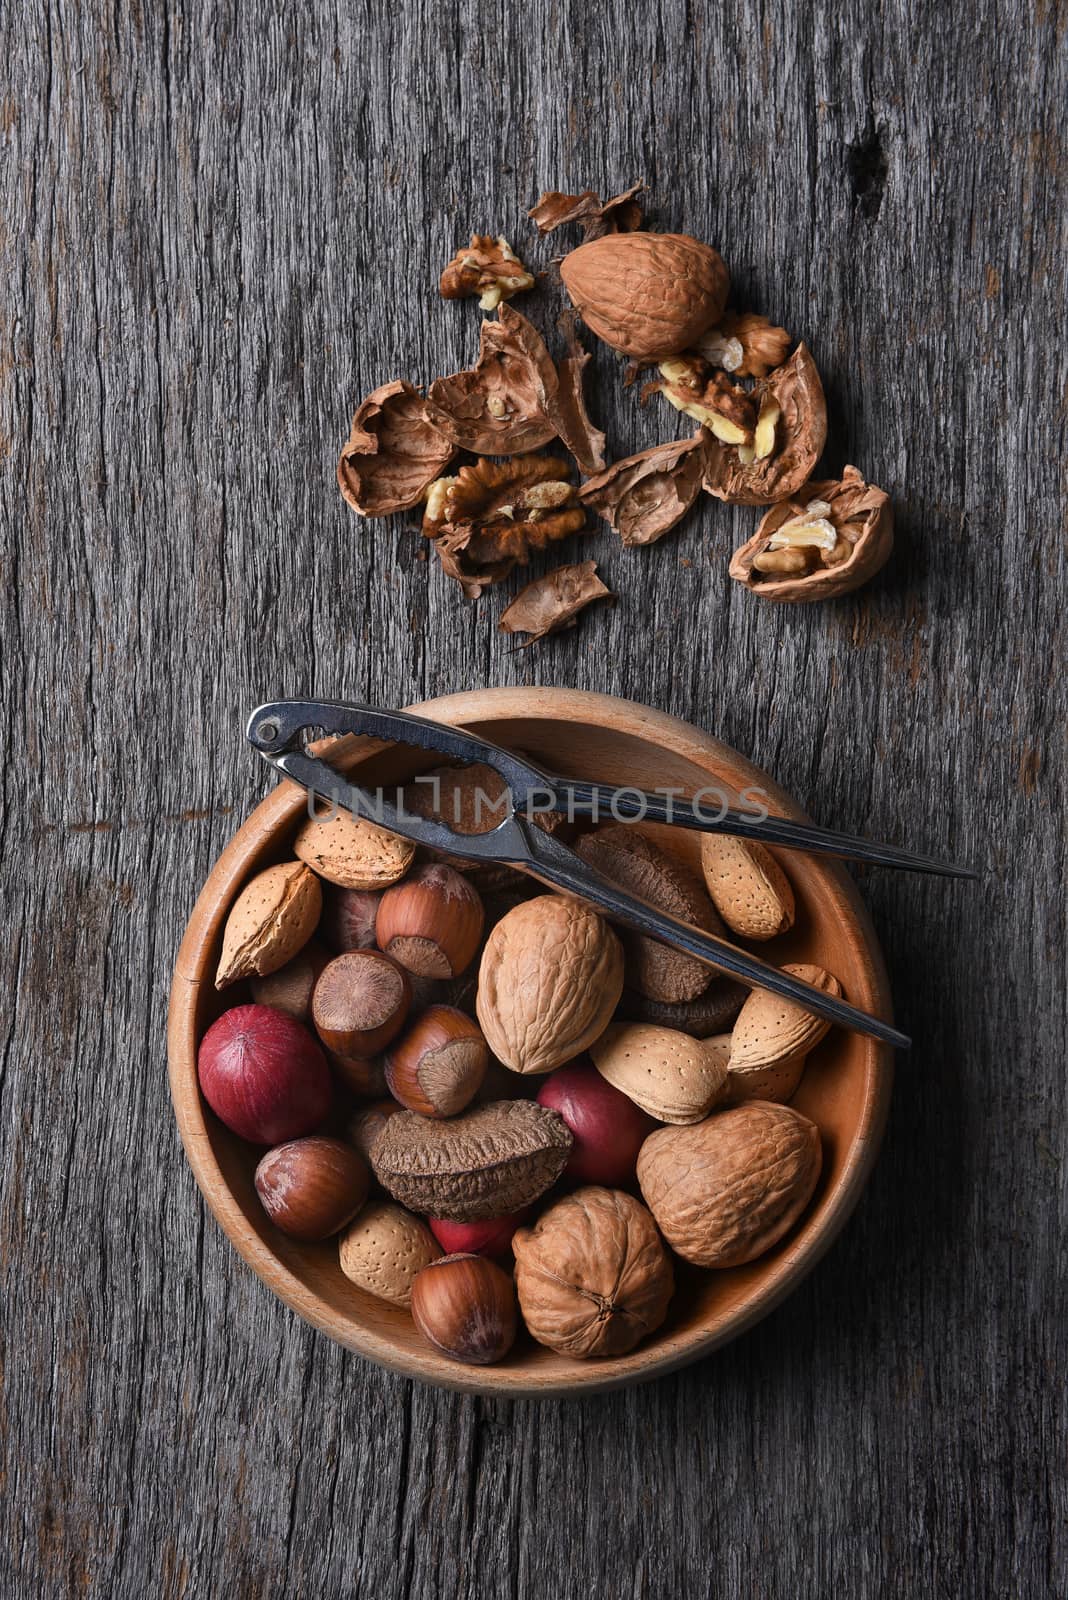 Bowl of Mixed Nuts and Nutcracker by sCukrov